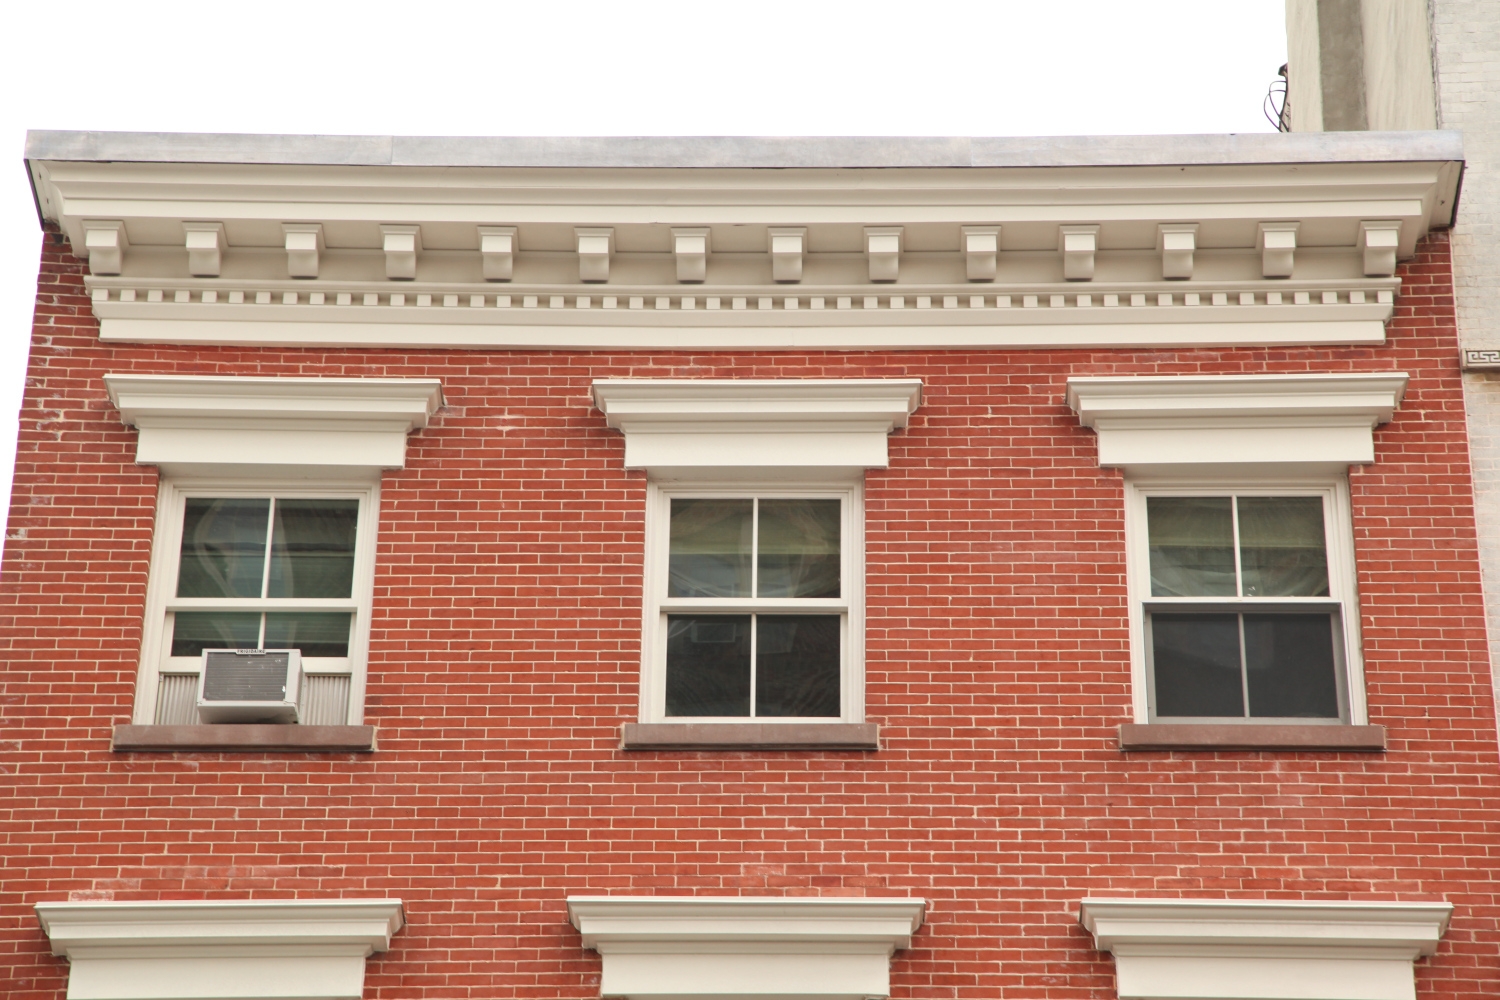 Exterior view of a New York City building displaying Jepol Construction's expert restoration work on a cornice, brickwork, ornamental window lintel, and window sills.